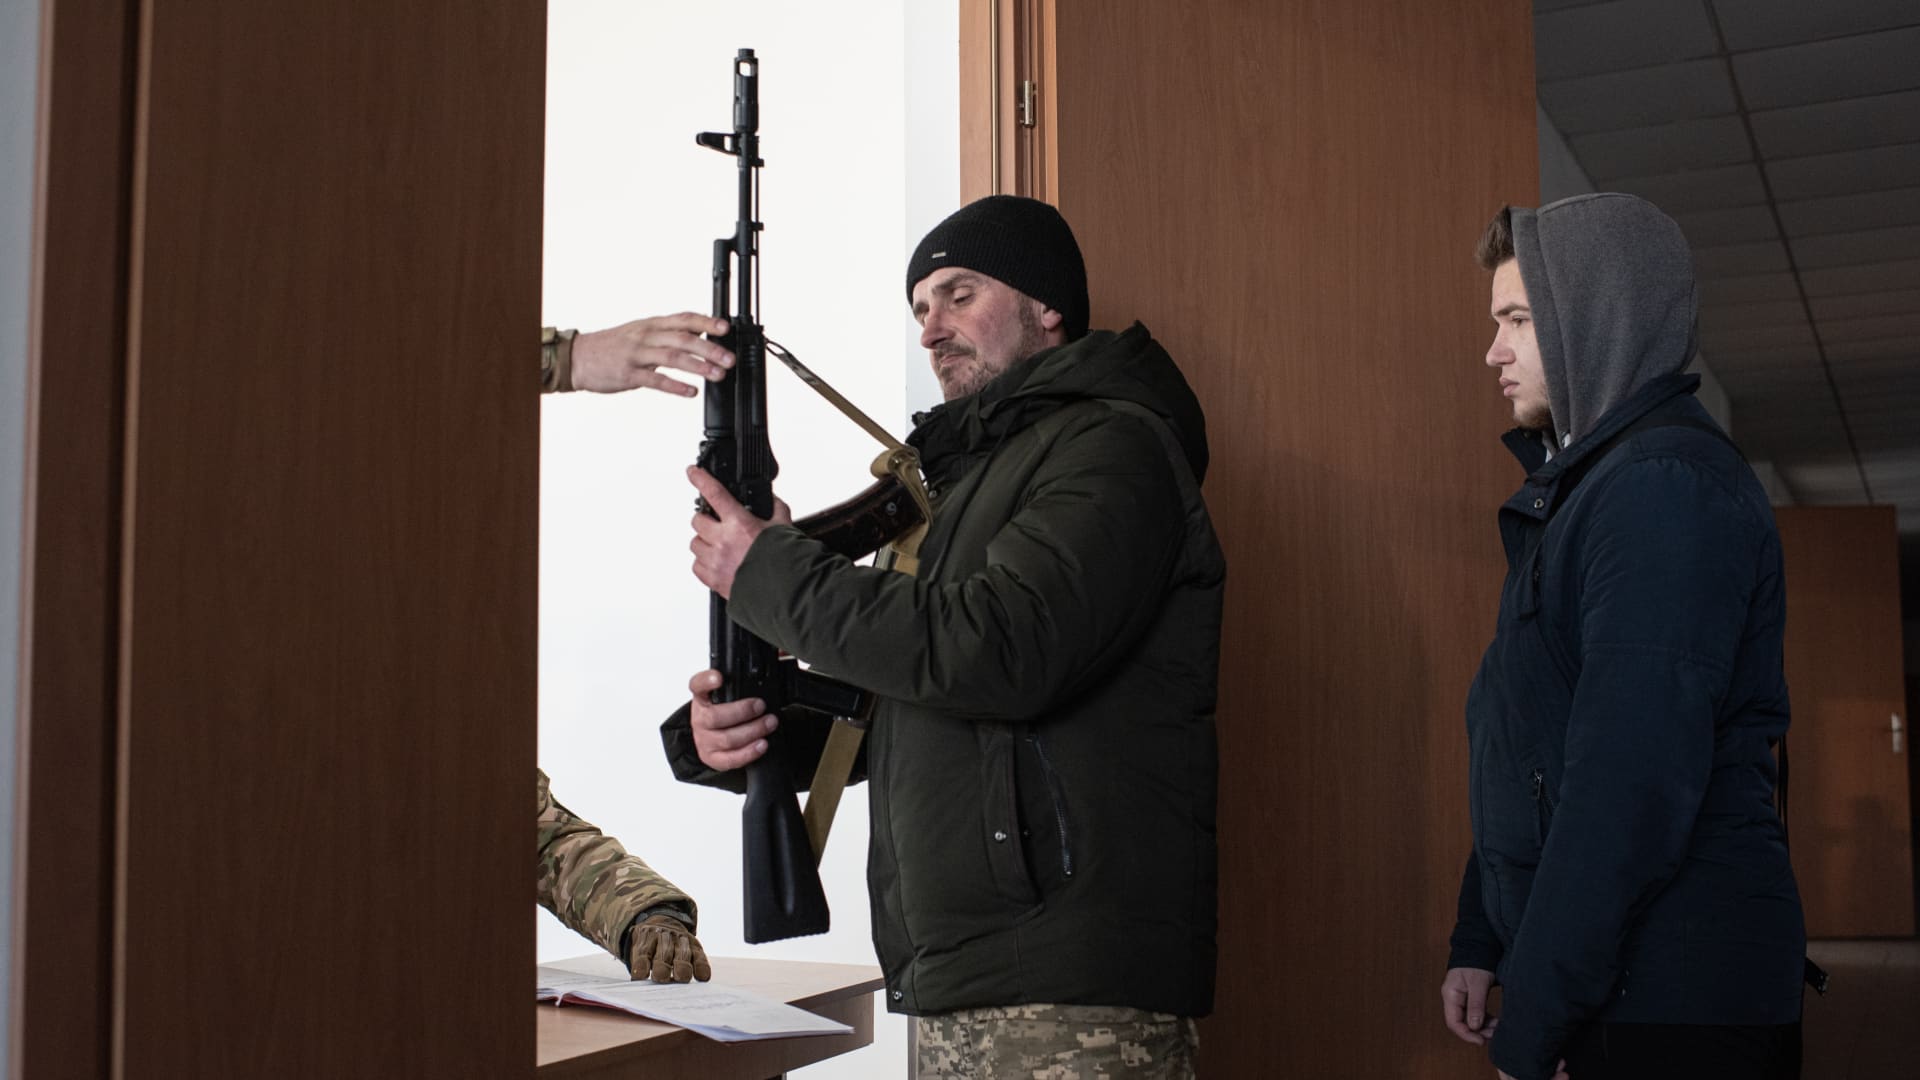 A civilian checks out an assault rife for a military training exercise conducted by the Prosvita society in Ivano-Frankivsk, Ukraine, on Friday, March 11, 2022.